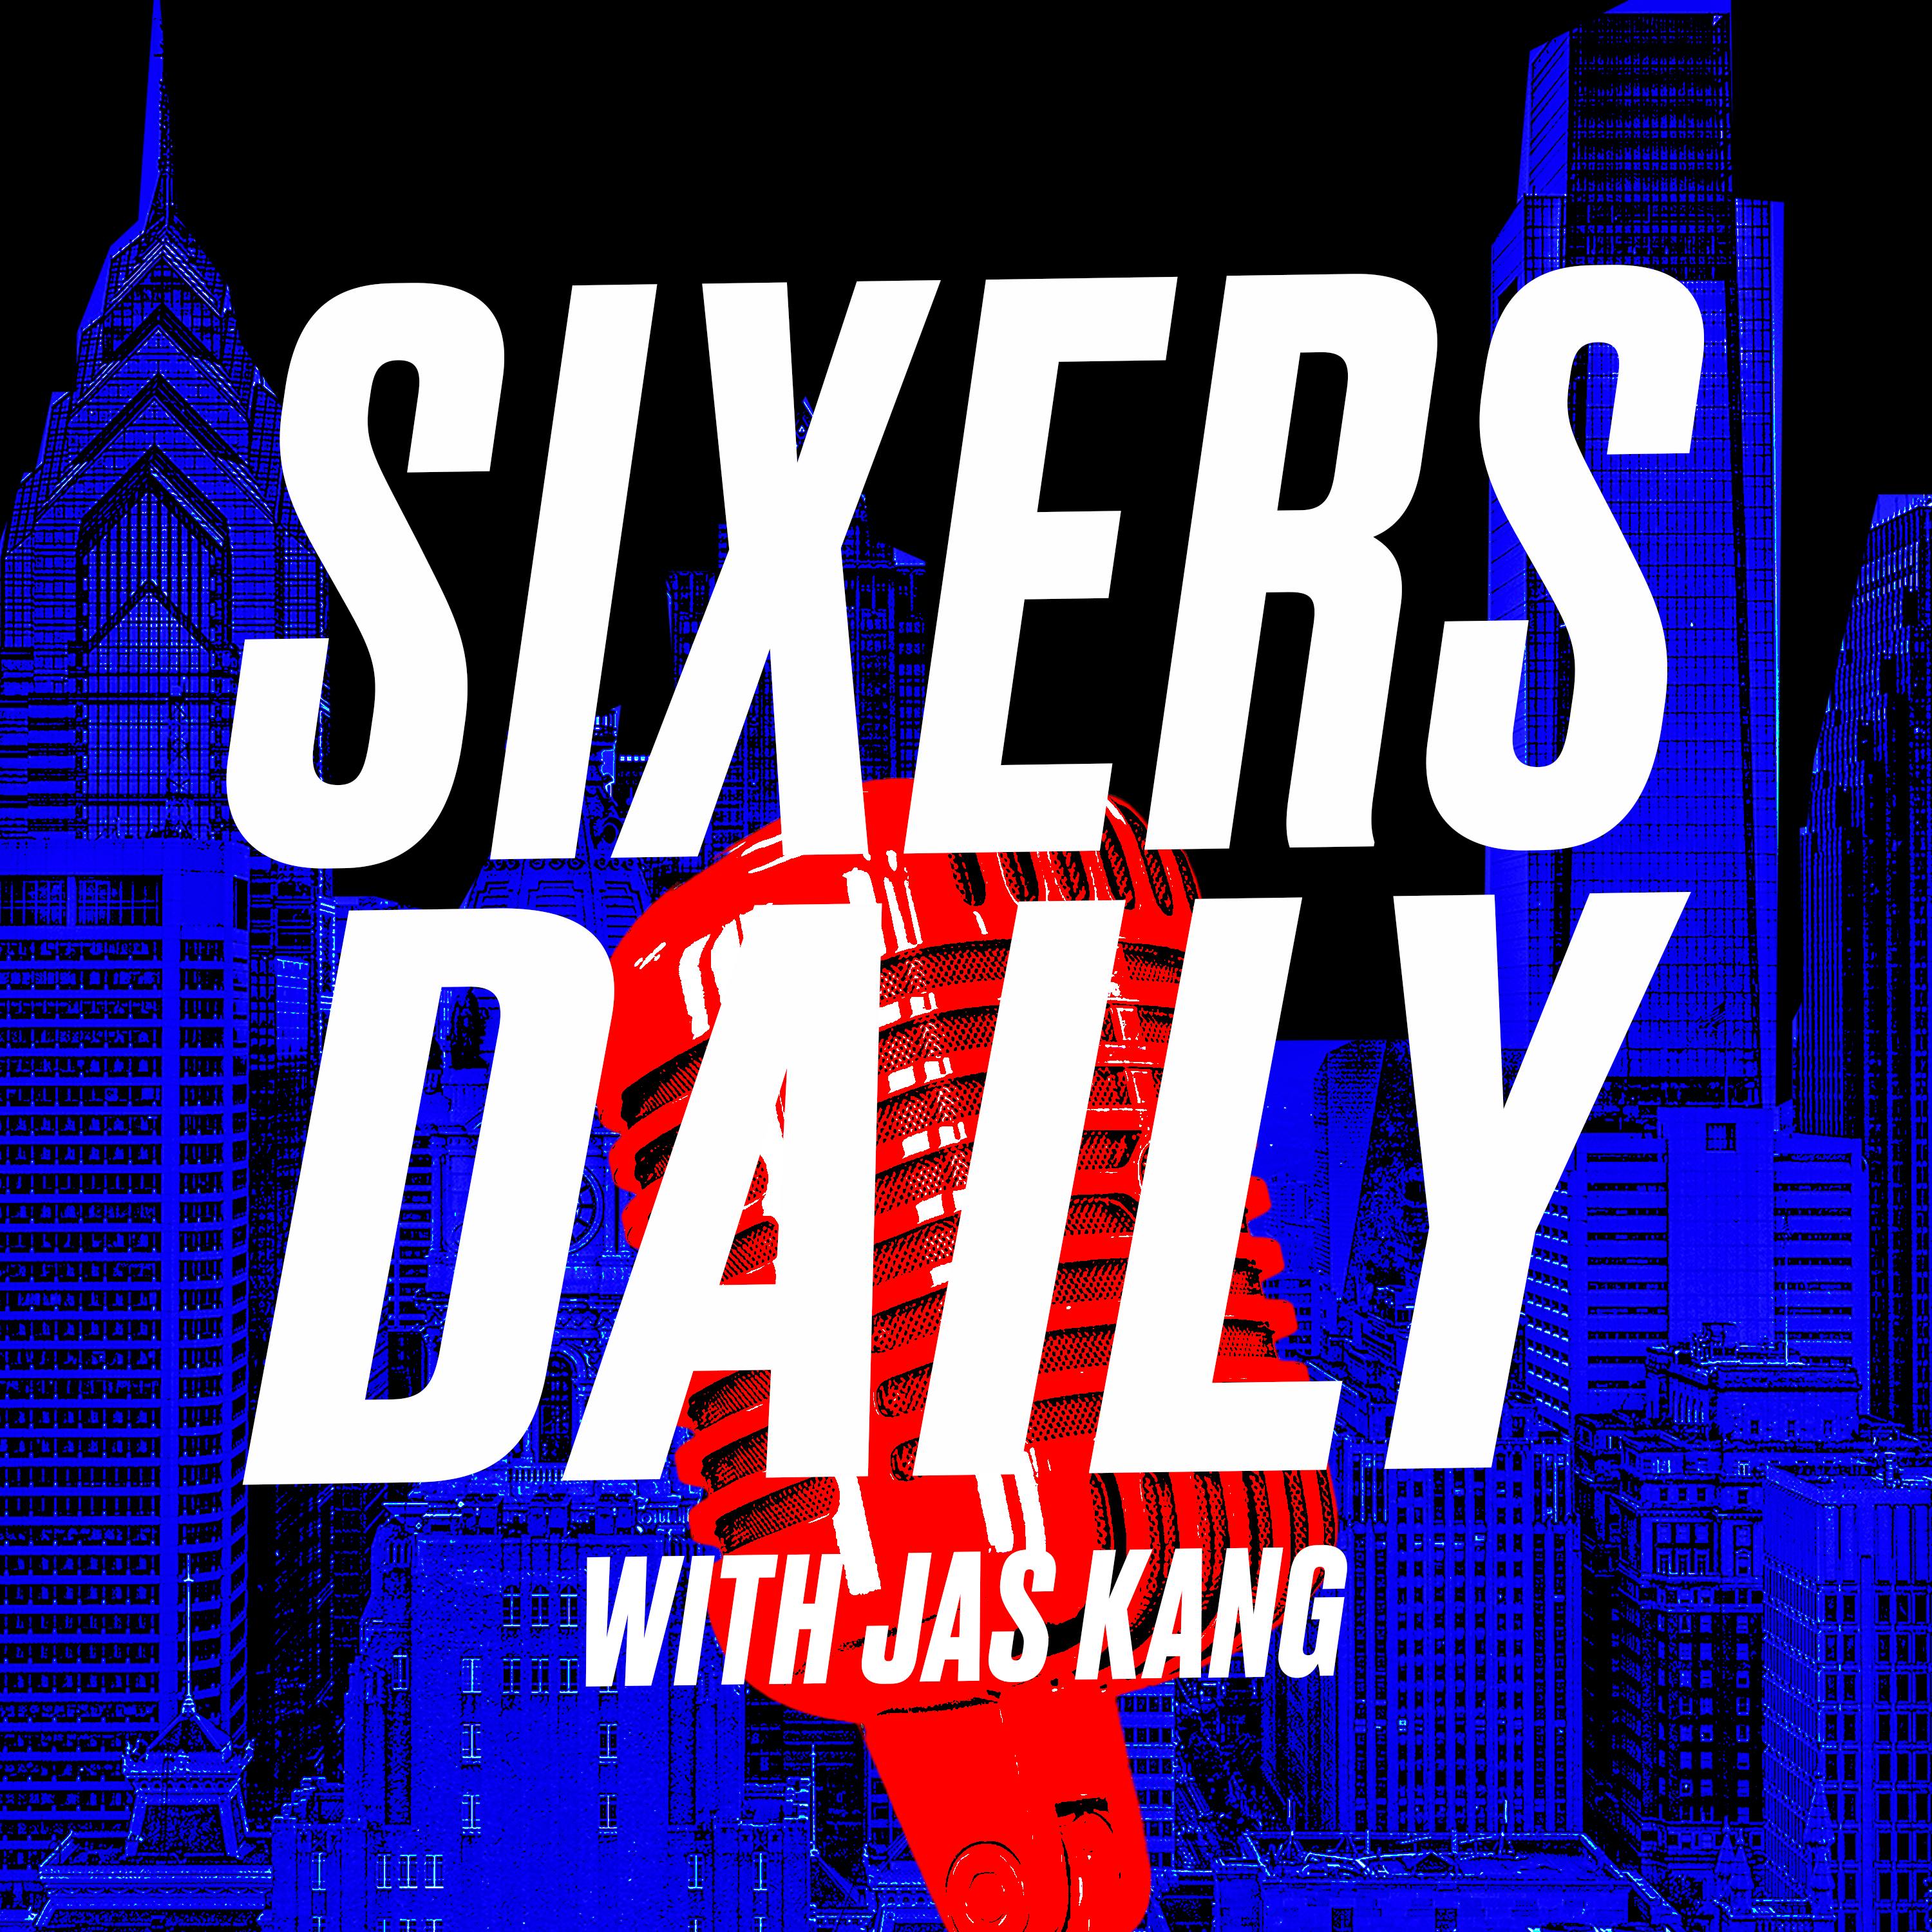 Sixers Daily with Jas Kang (Part 1) - Sixers will keep their first-round pick after the Nets defer until 2023. Plus what will Philly do with the backup center spot? With Dave Early